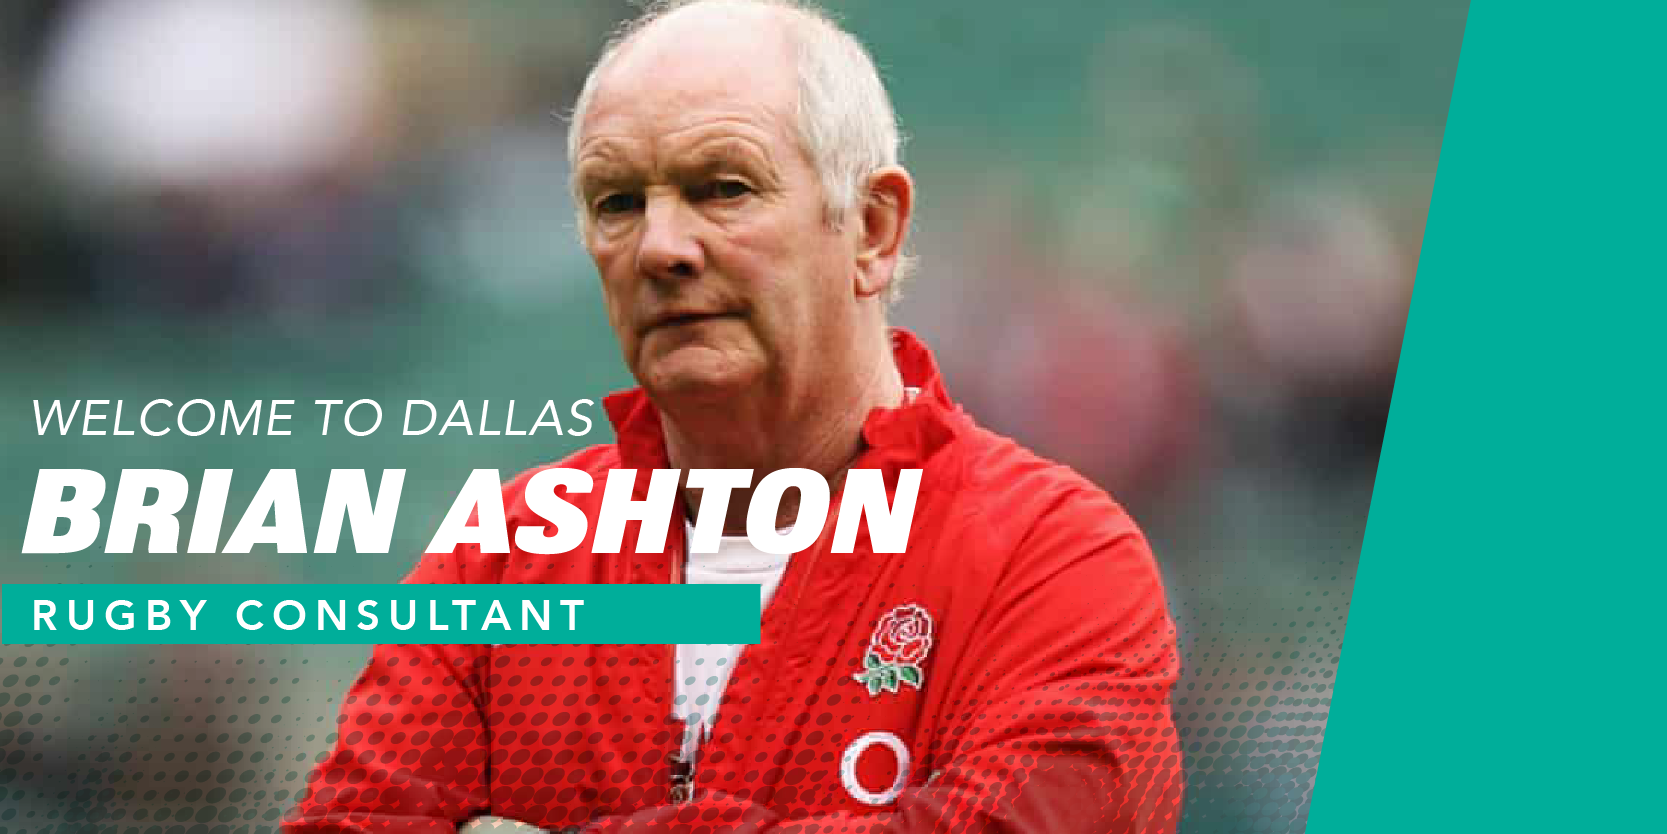 Brian Ashton MBE Joins the Jackals as Rugby Consultant